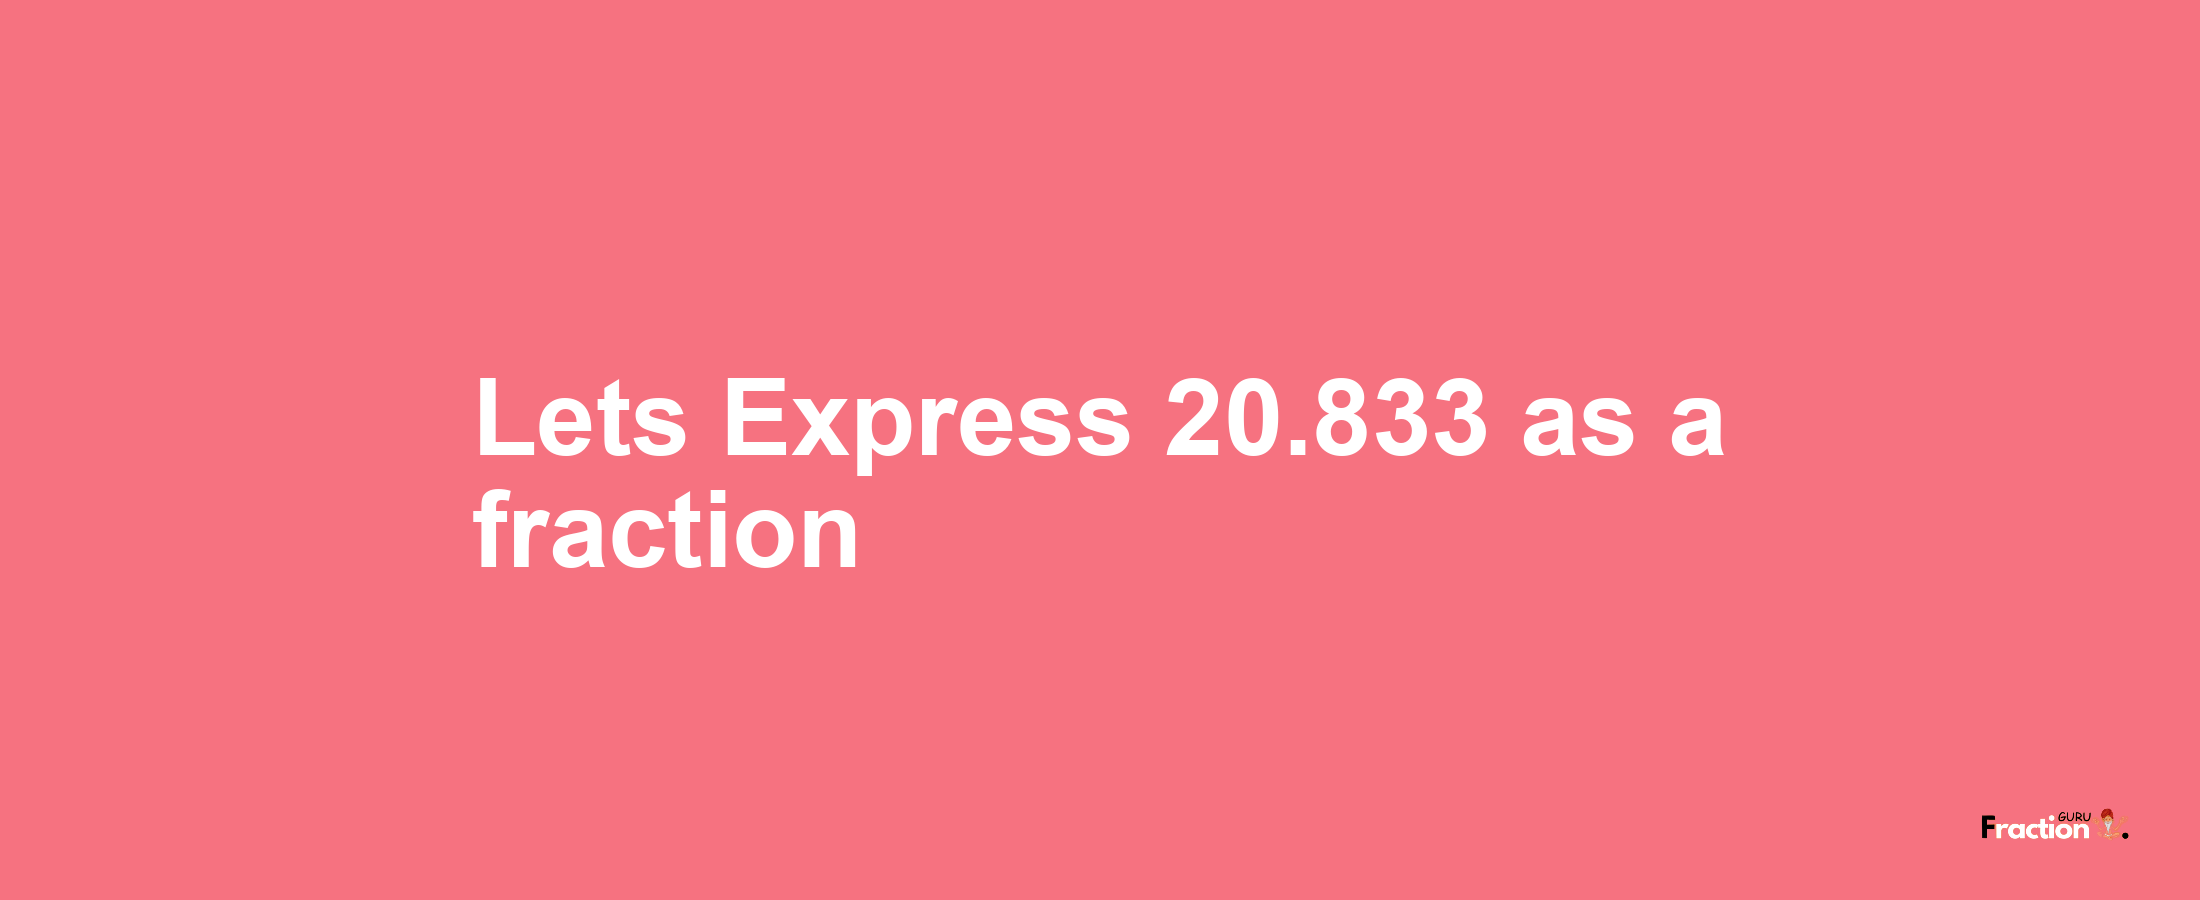 Lets Express 20.833 as afraction